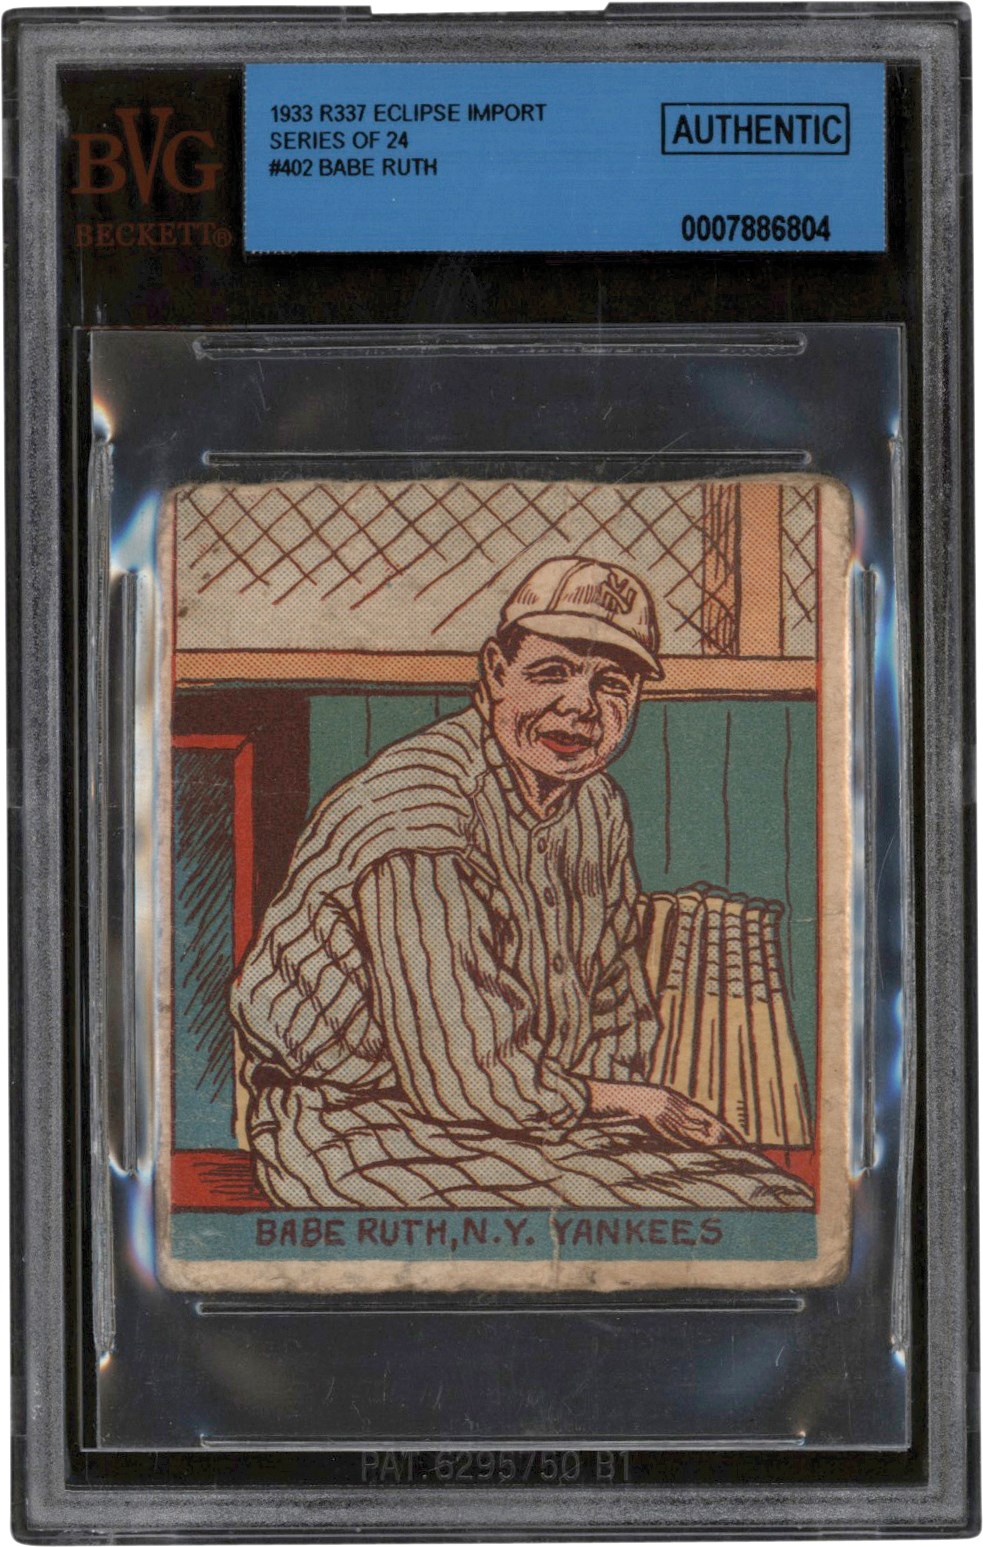 - 933 R337 Eclipse Import #402 Babe Ruth BVG Authentic